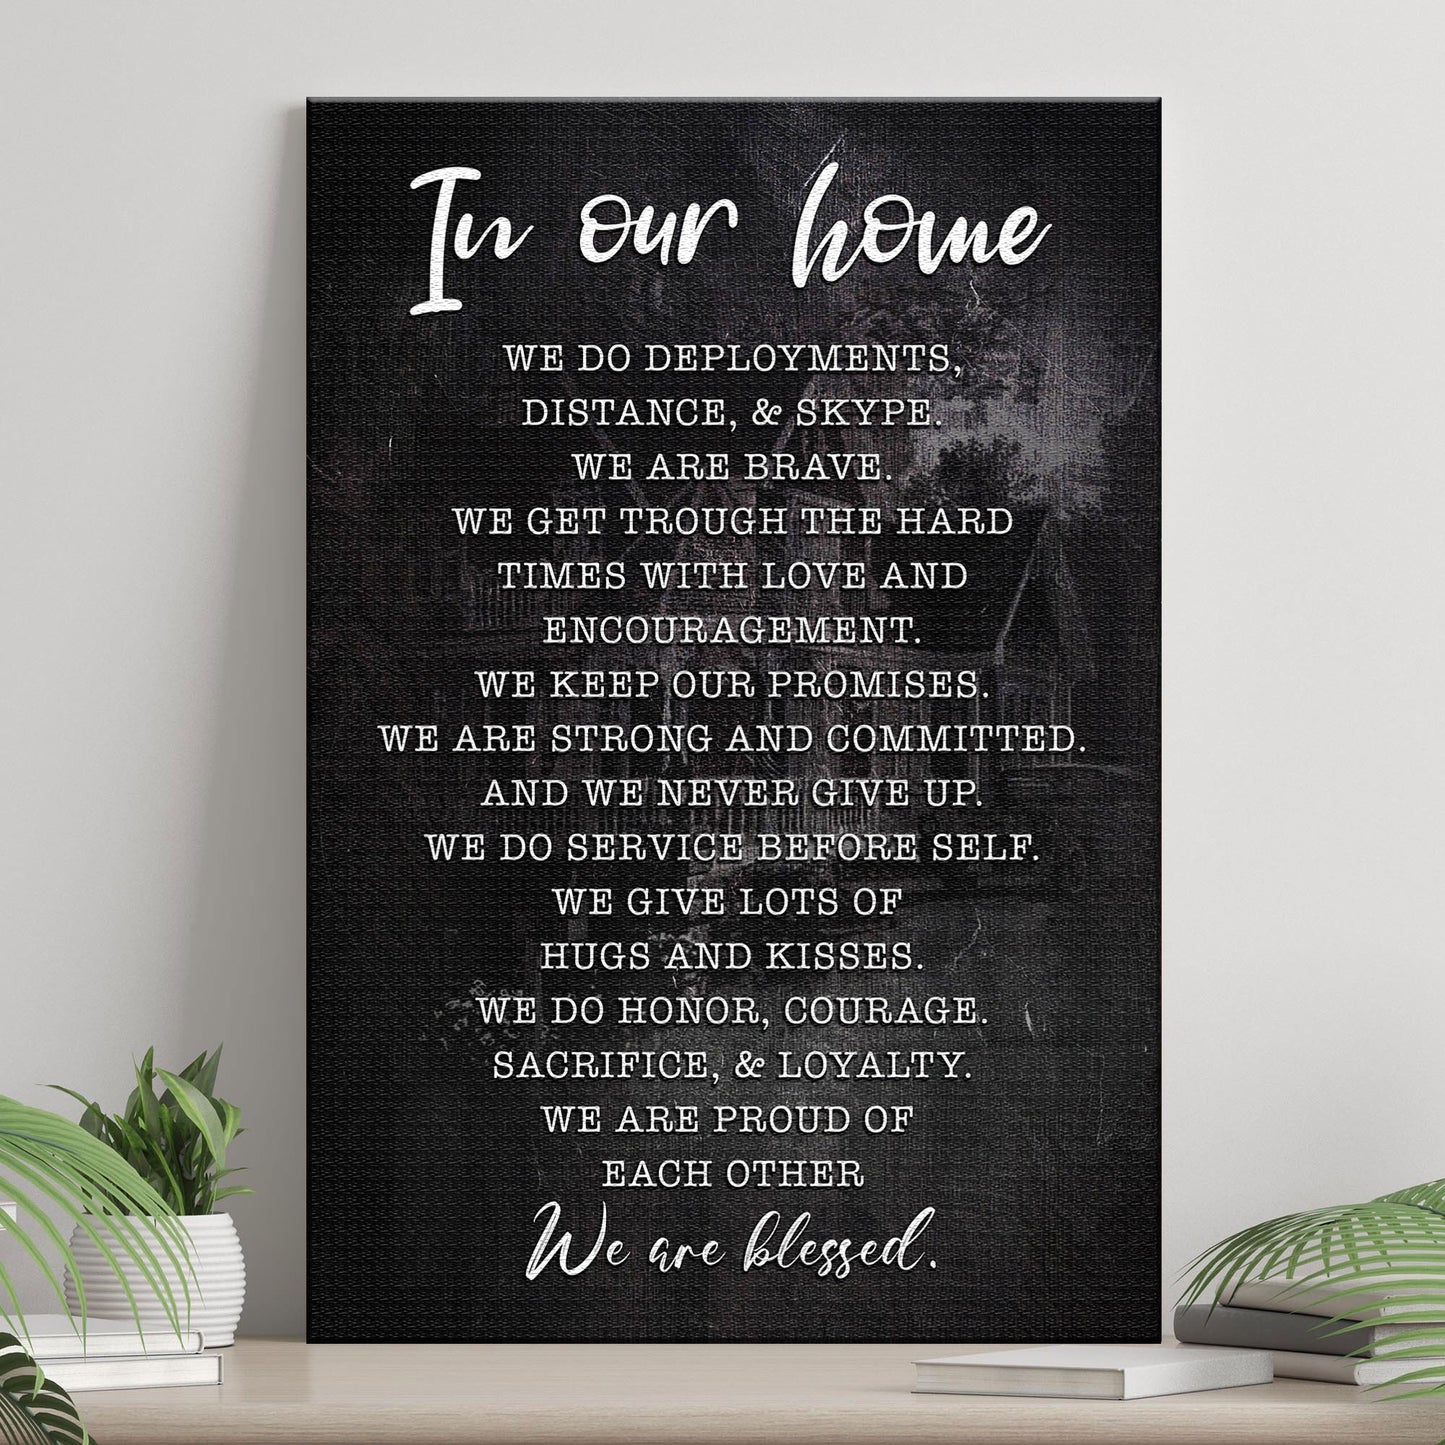 In Our Home We Are Blessed Sign II - Image by Tailored Canvases